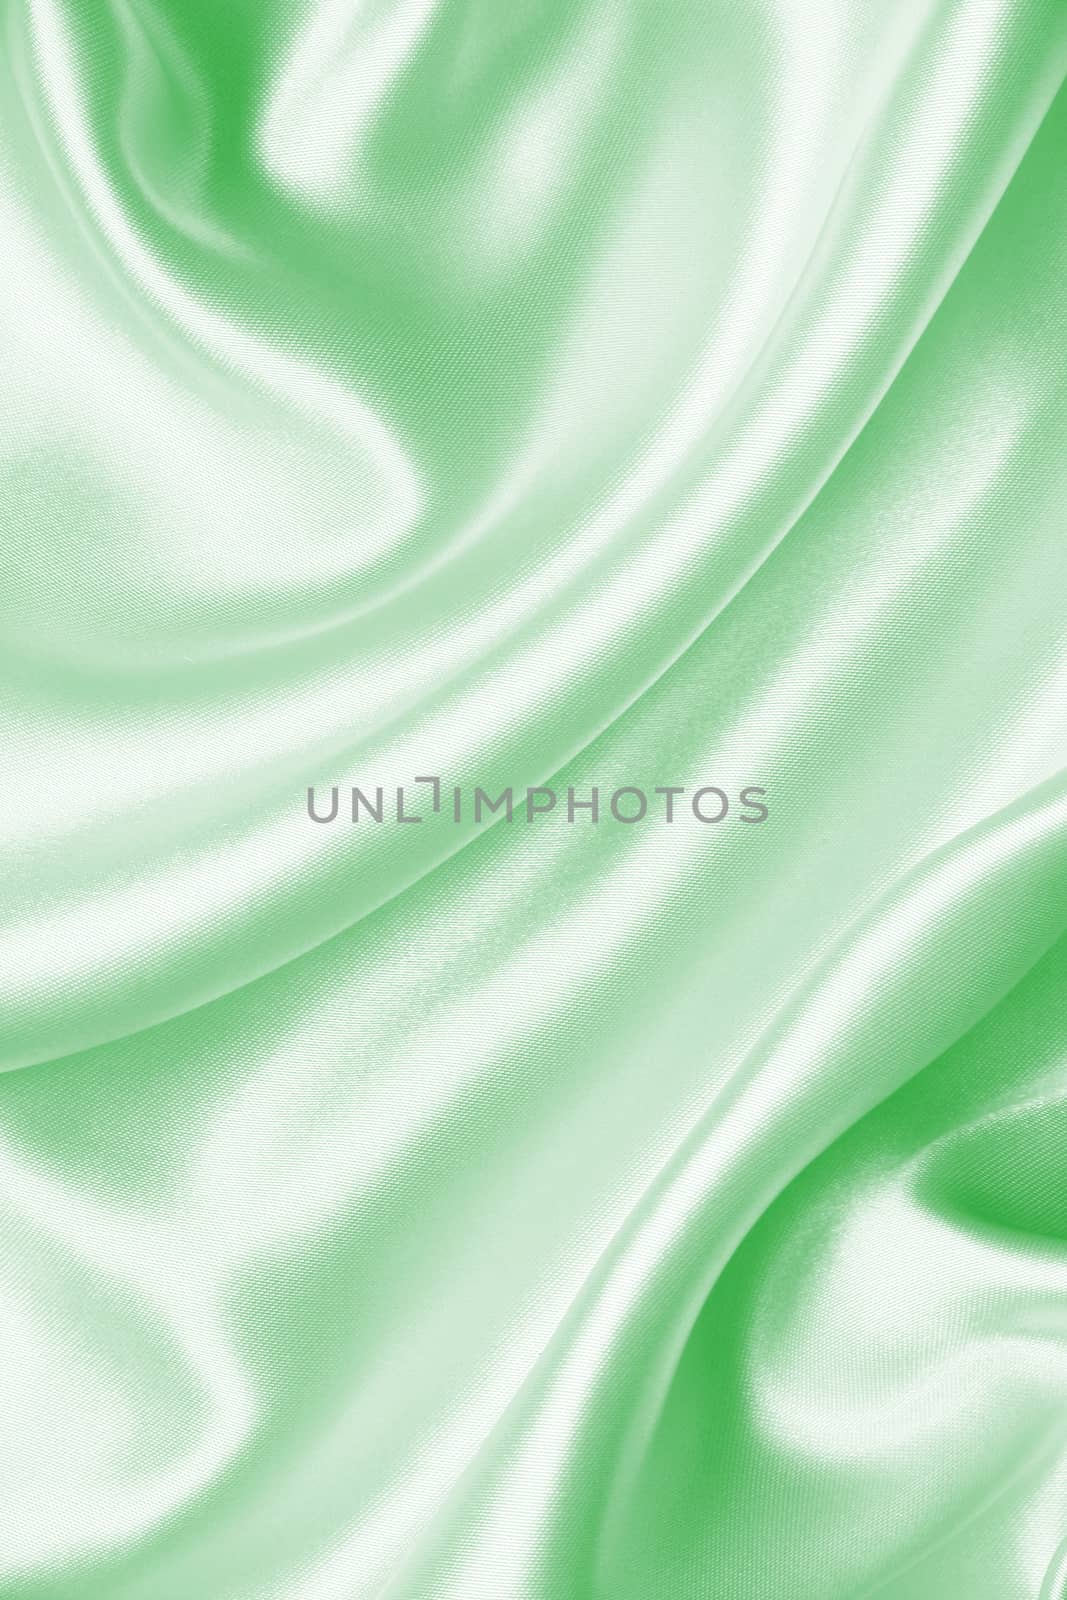 Smooth elegant green silk or satin as background  by oxanatravel